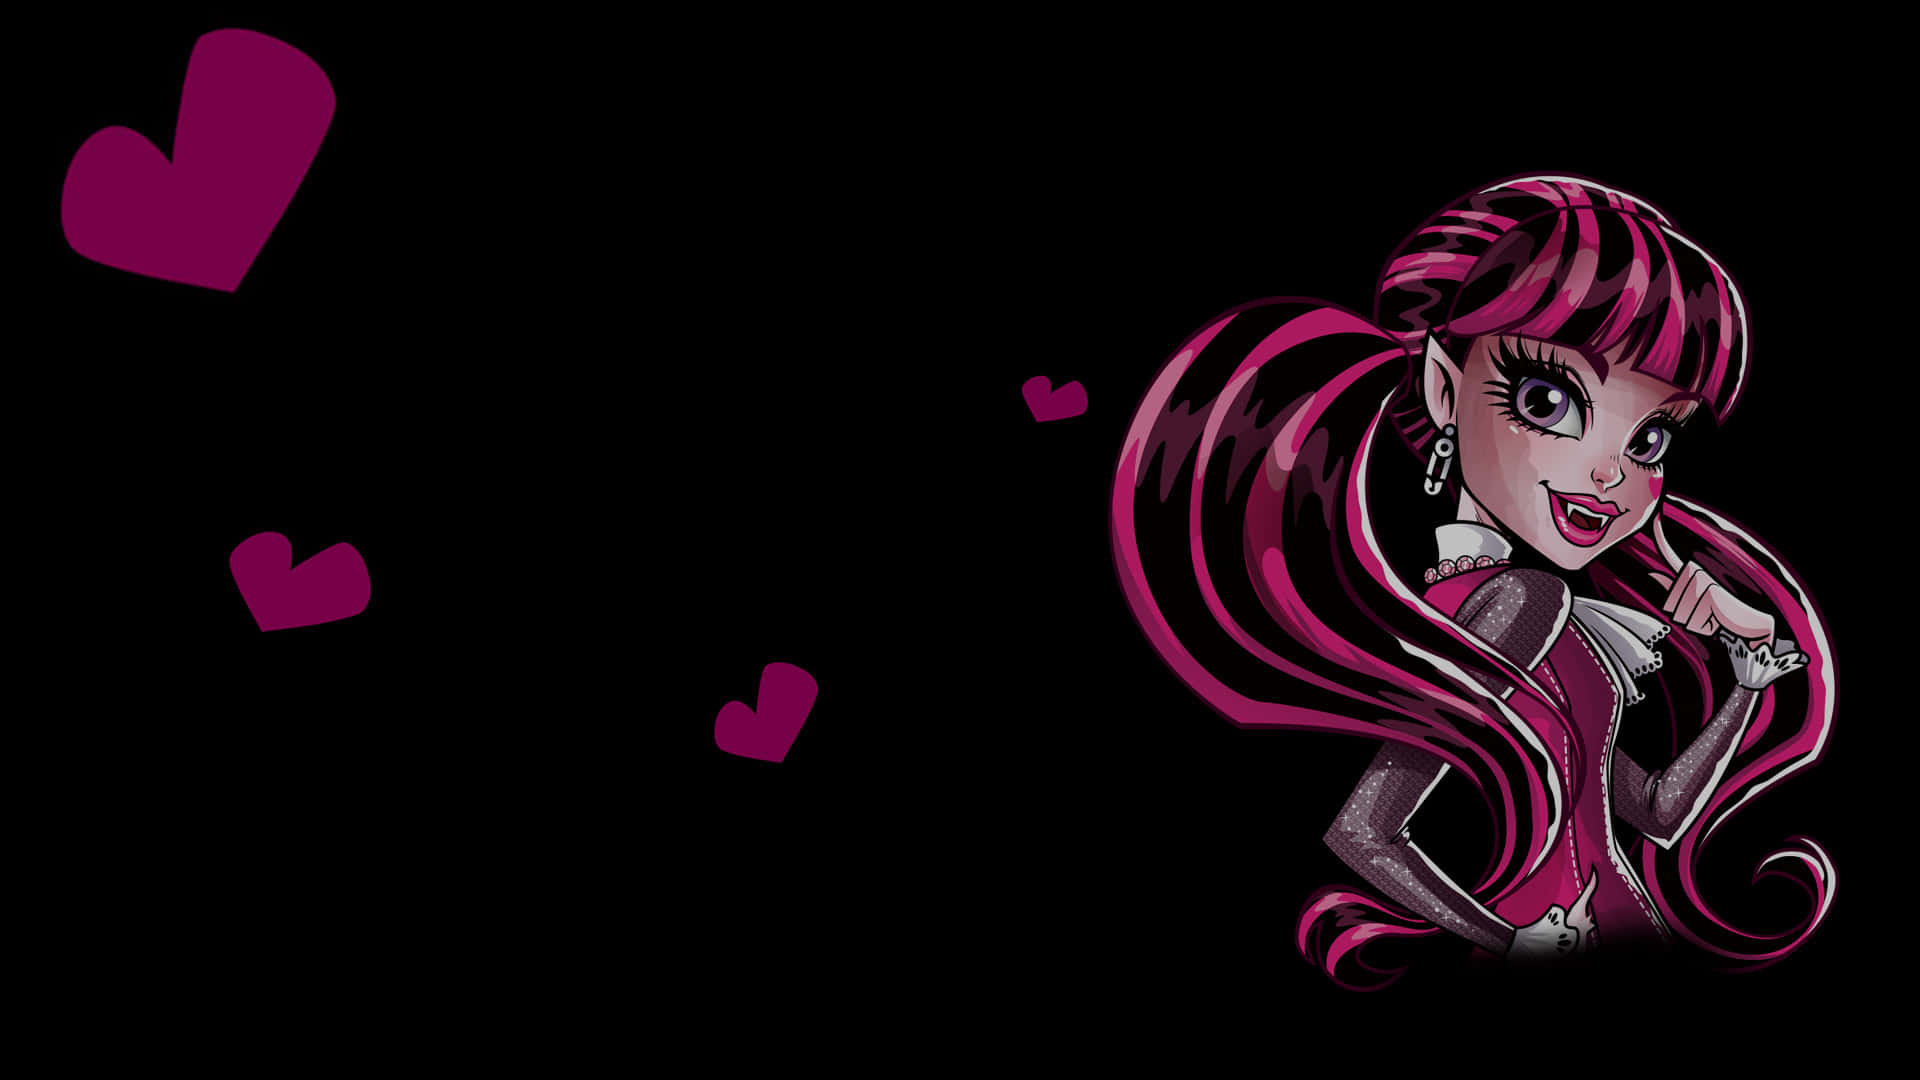 Monster High students dressed as their favorite characters. Wallpaper